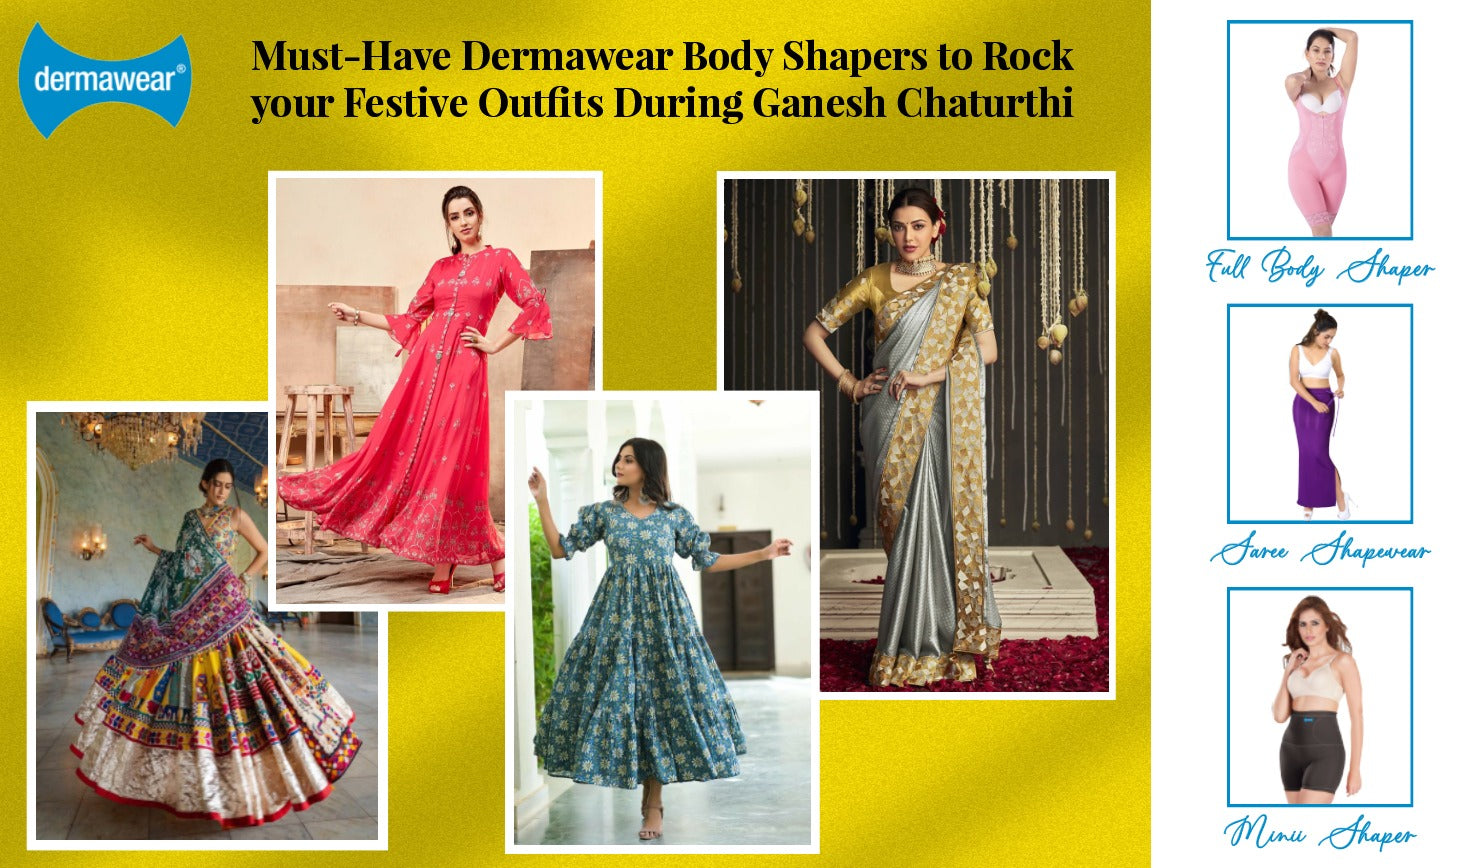 Styling Tips: How to Rock Your Festive Outfits with Dermawear Body Sha